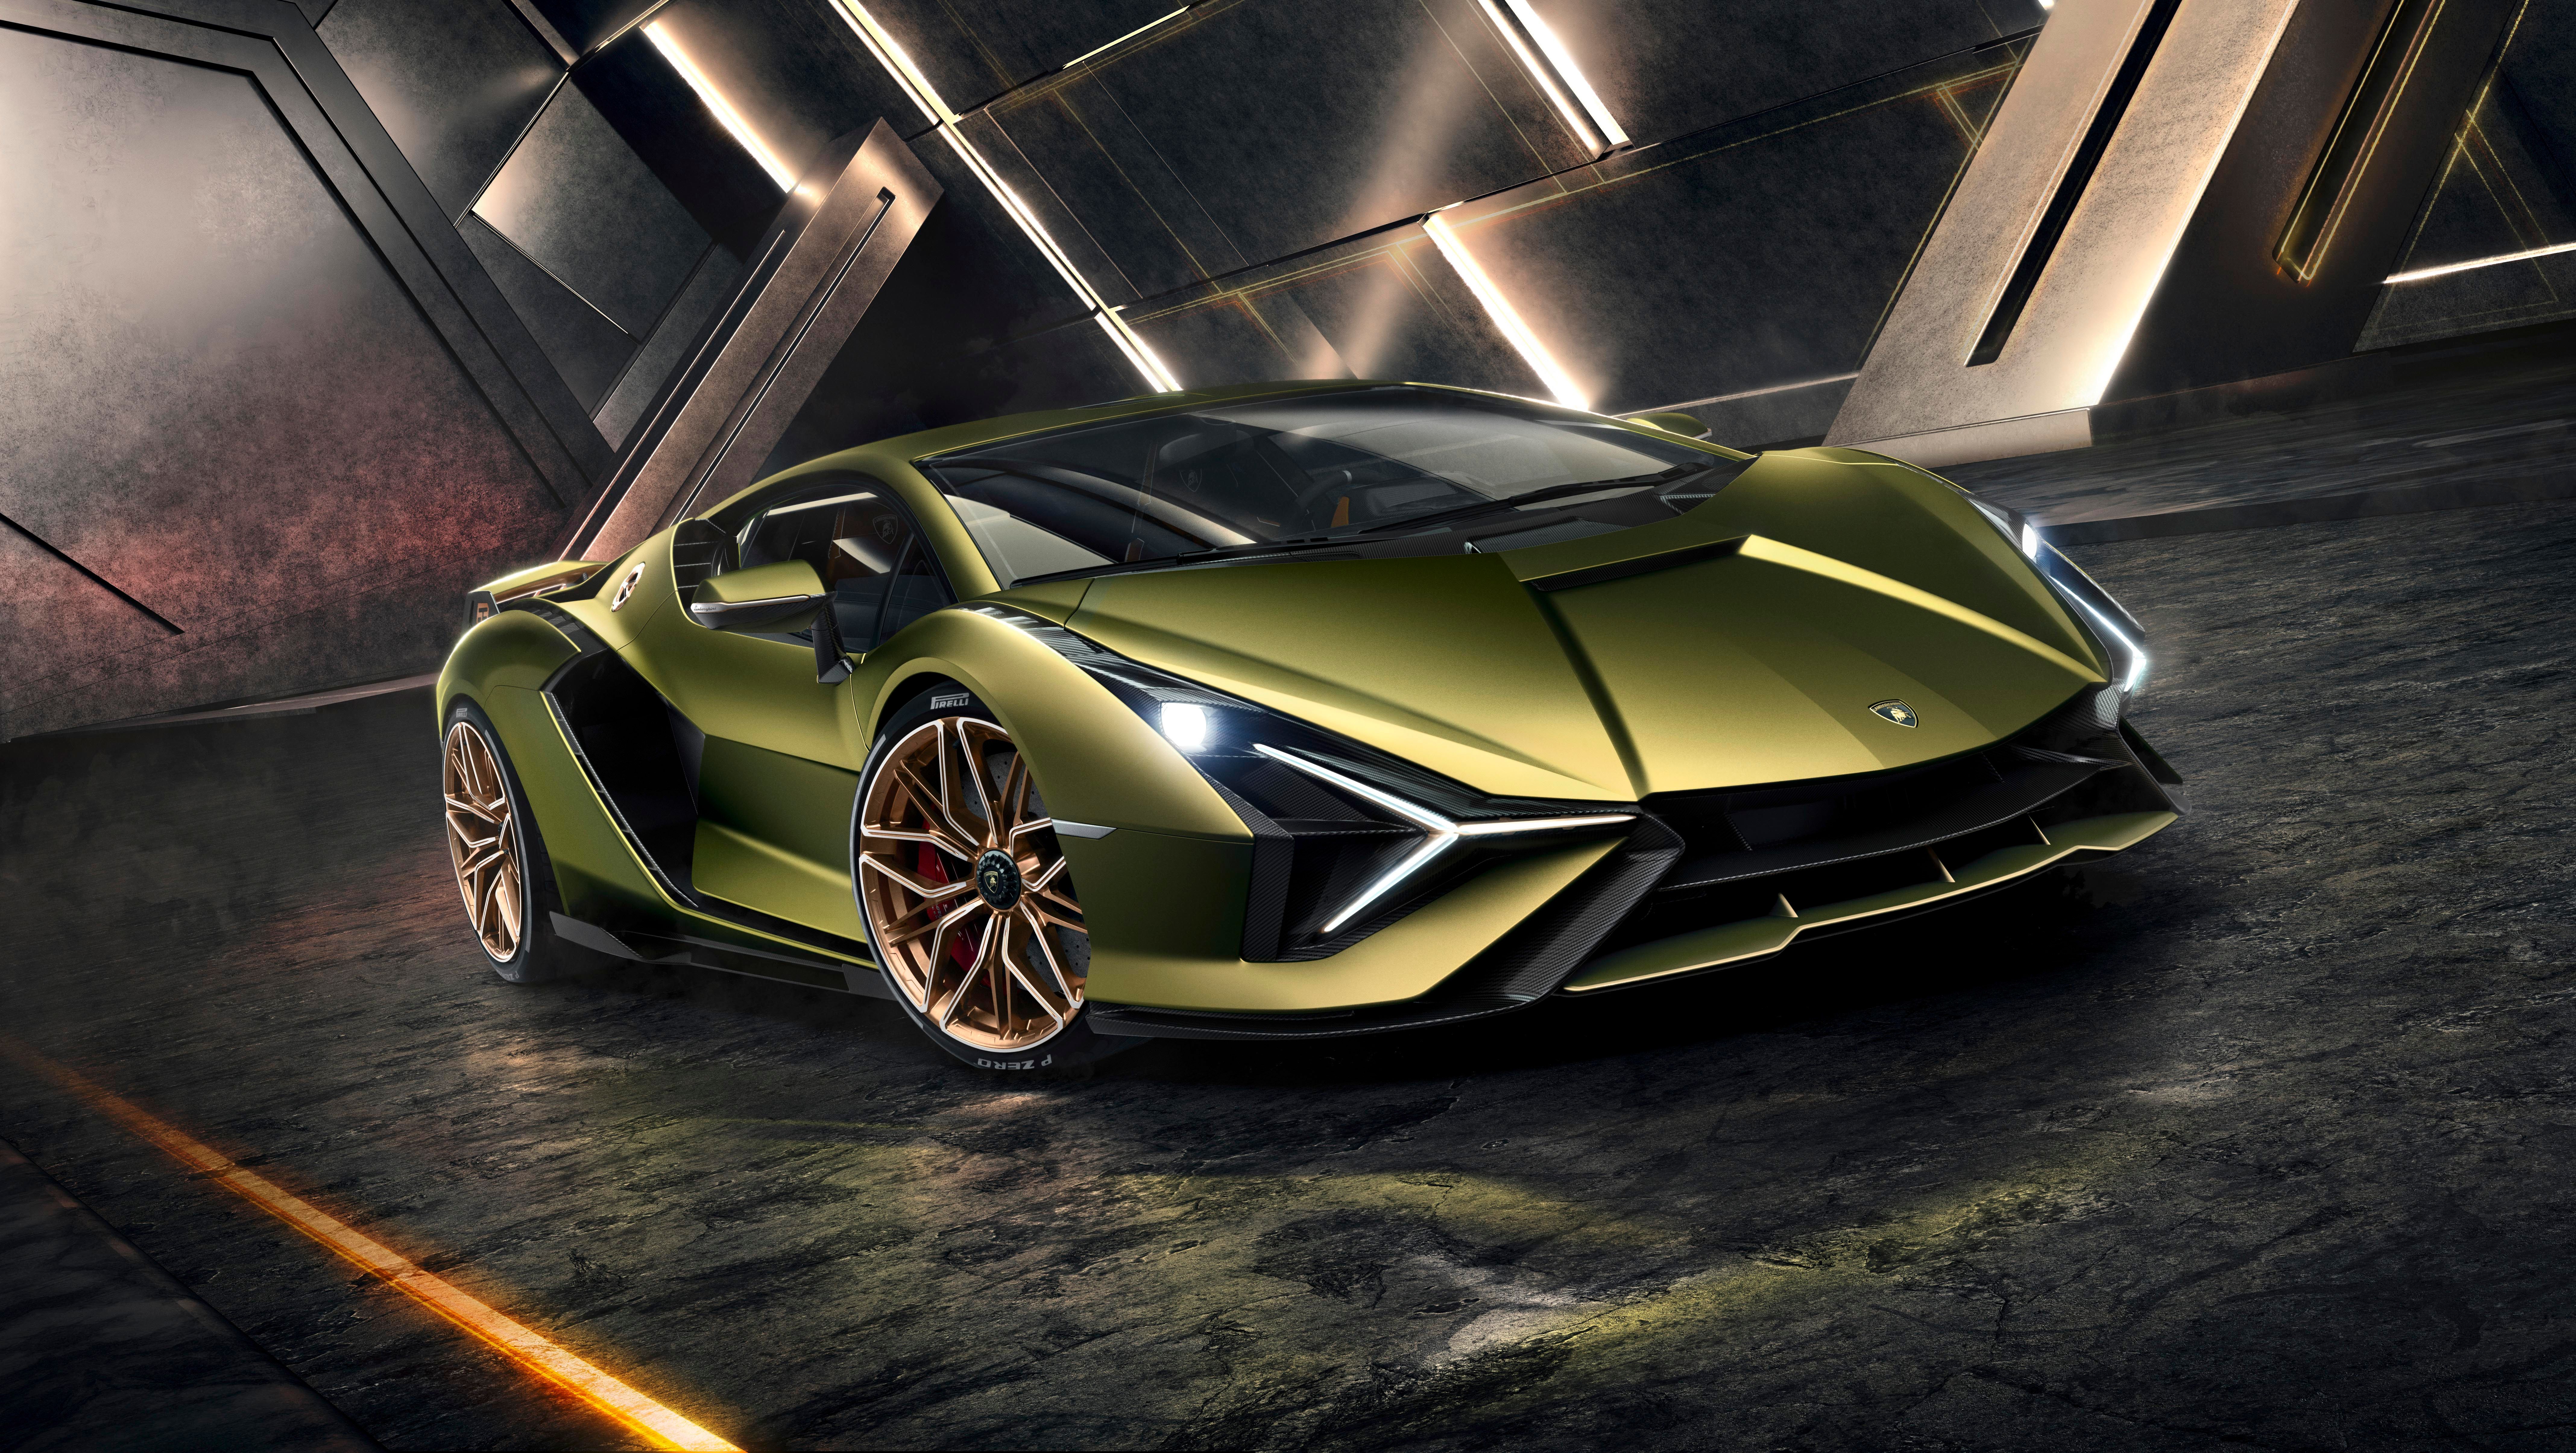 2020 - 2021 The 2020 Lamborghini Sian is Lambo's first hybrid and its most powerful car!